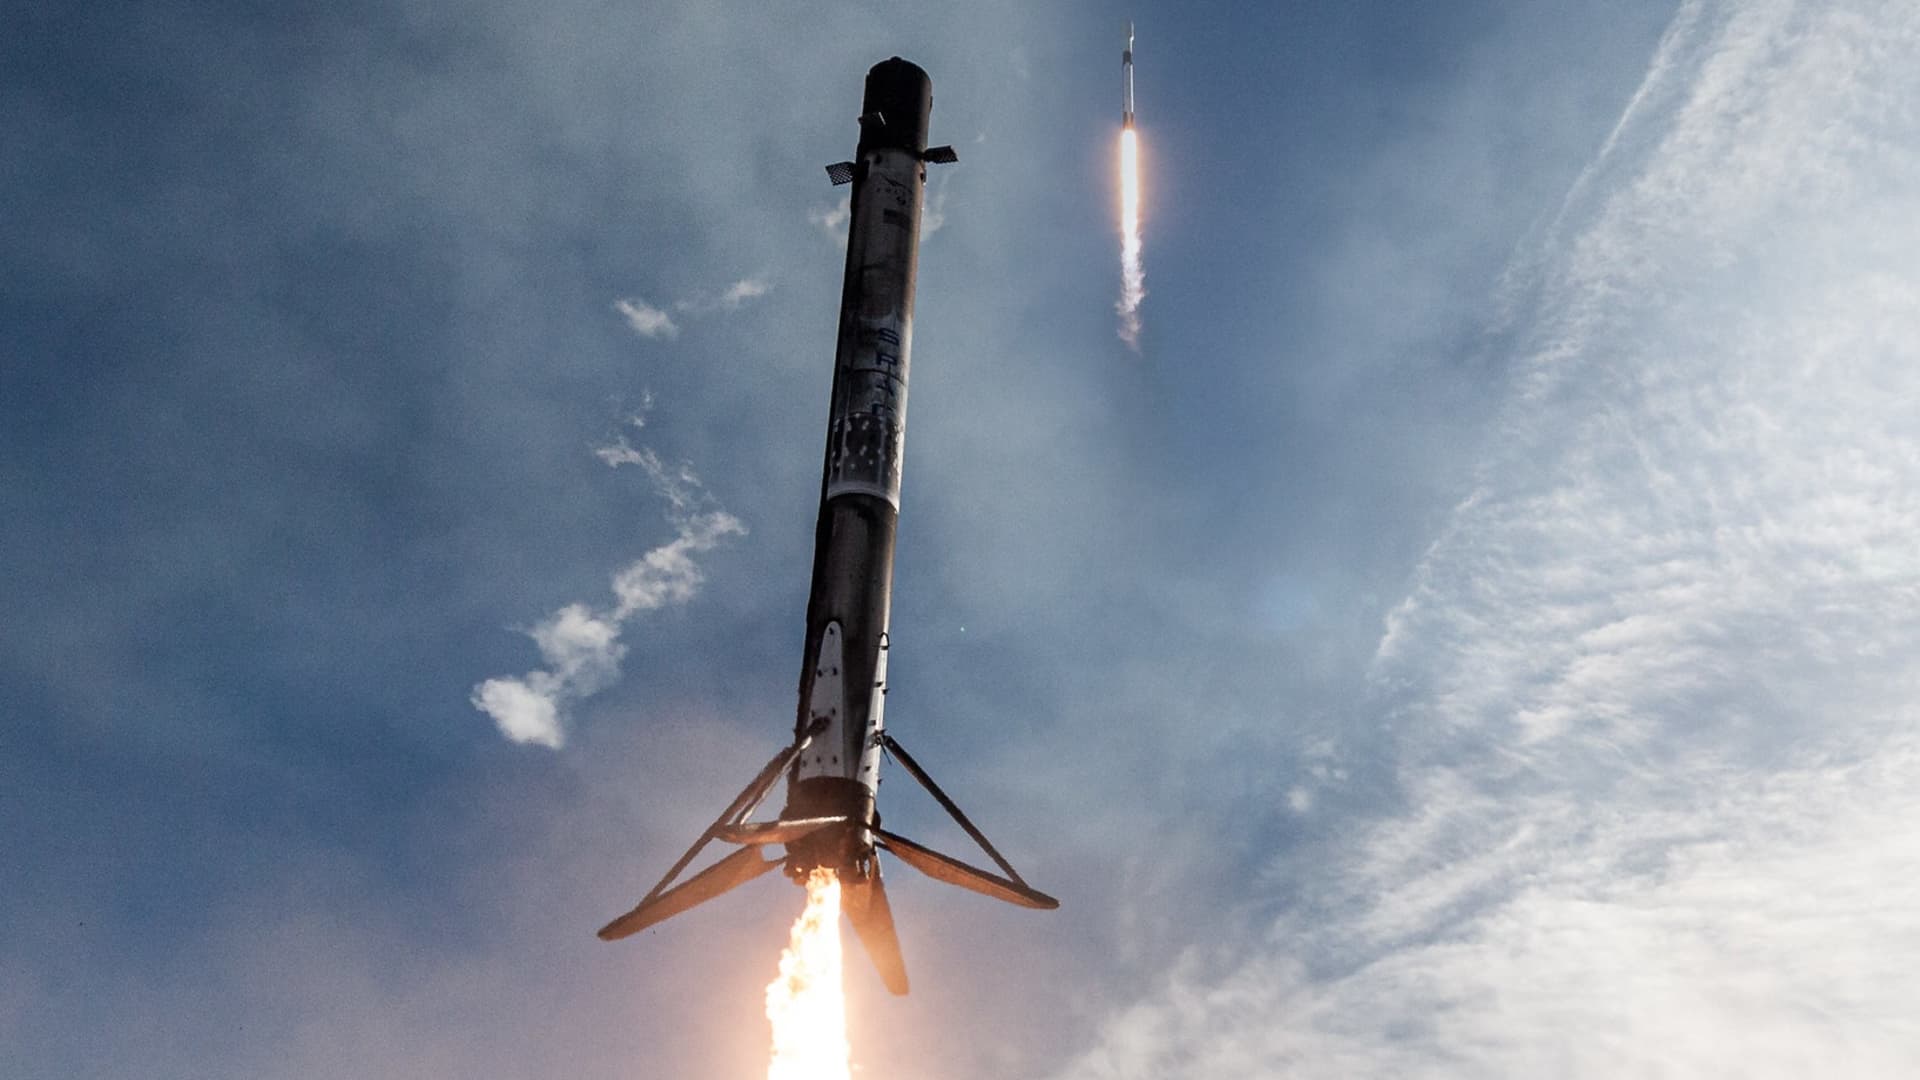 A composite image showing a Falcon 9 rocket booster lifting off and a few minutes later landing back near the launchpad.